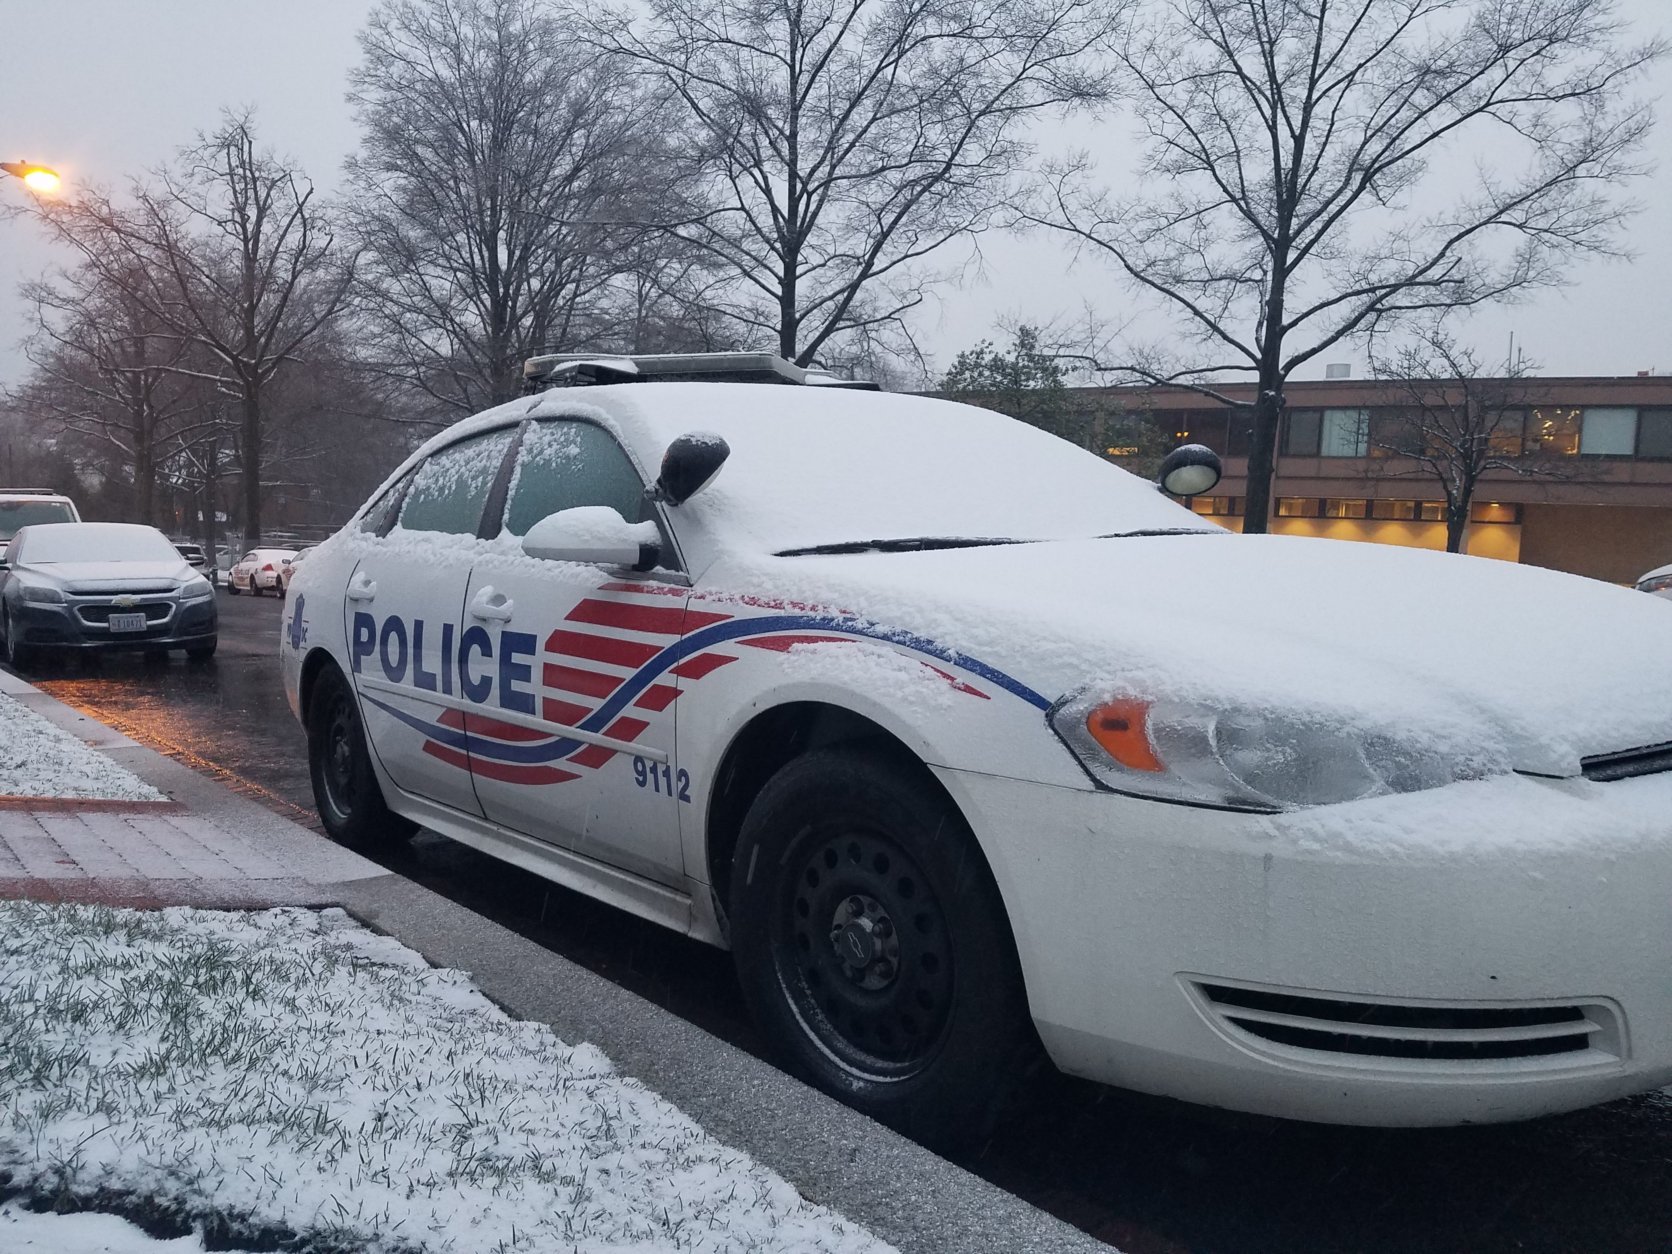 Snow collects on a police car in Northwest D.C. Wednesday, March 21. (WTOP/William Vitka)